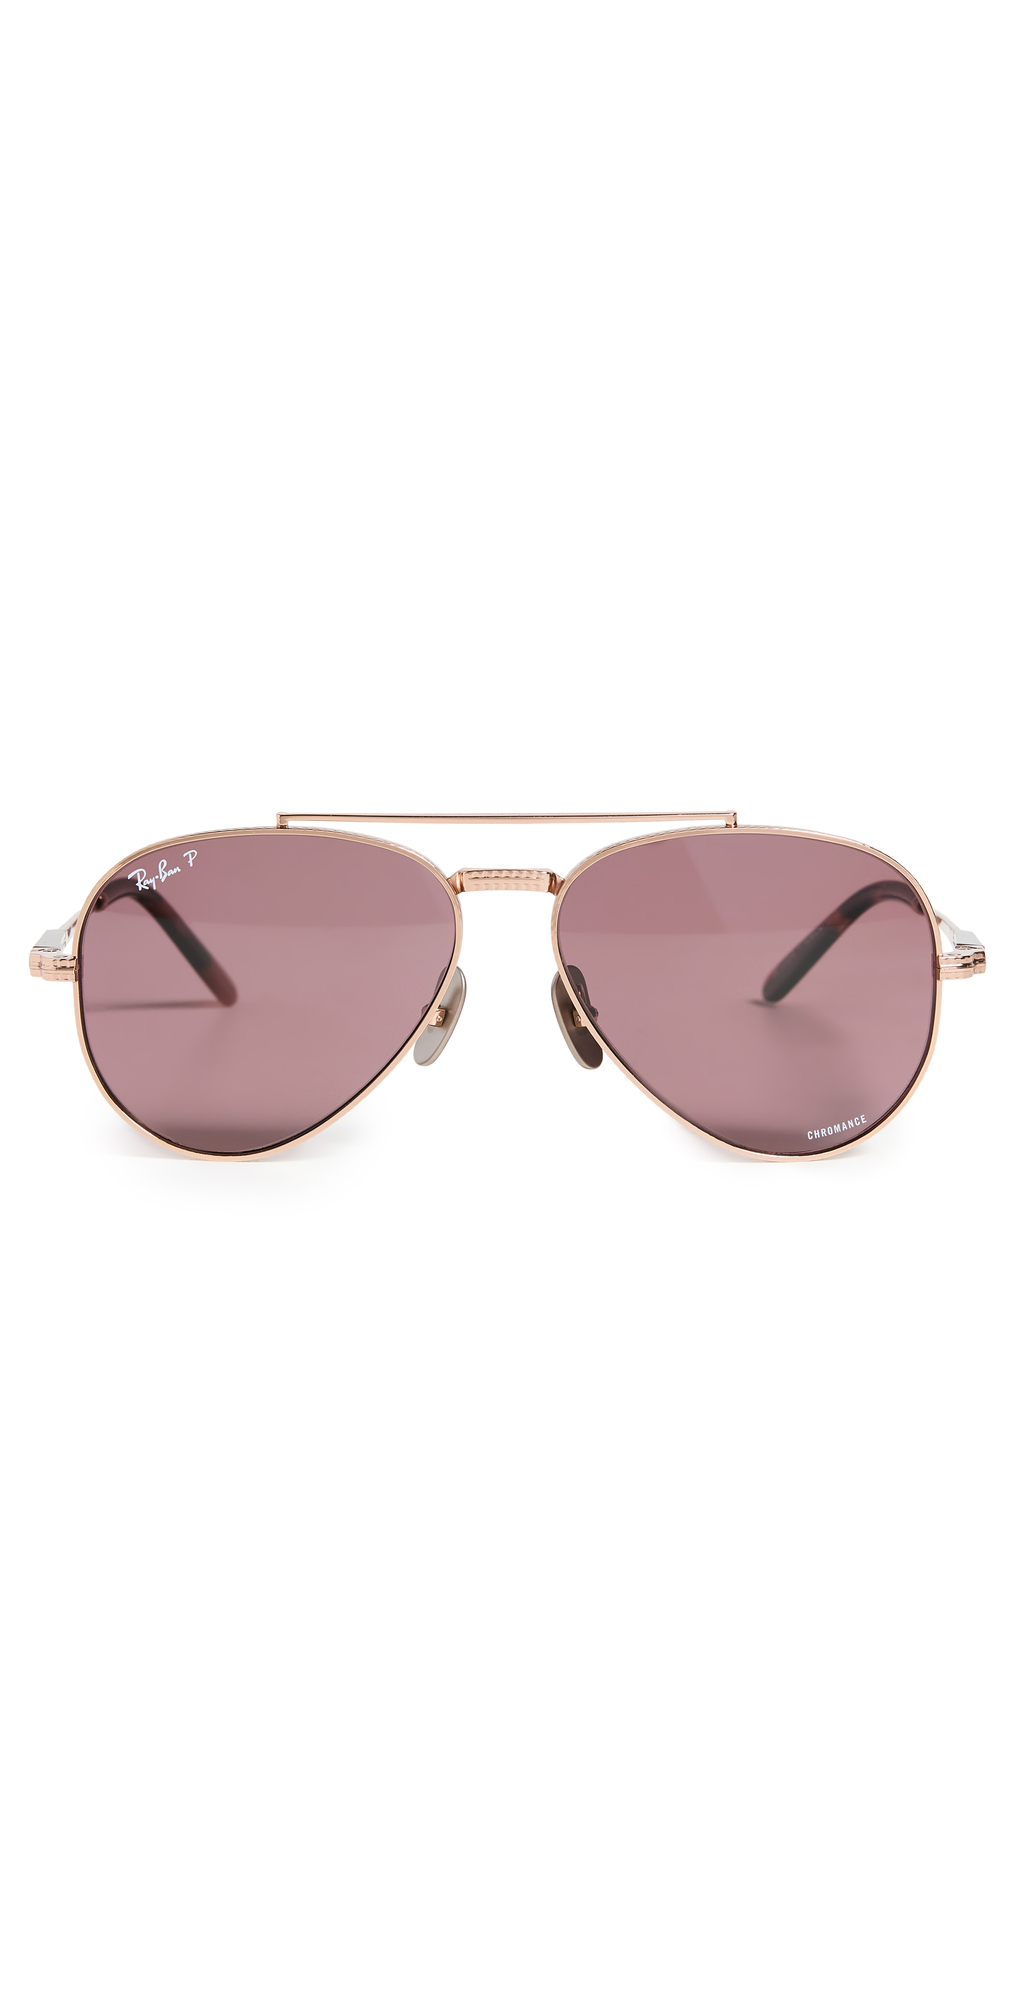 Ray-Ban 0RB8225 Aviator Sunglasses in gold / rose